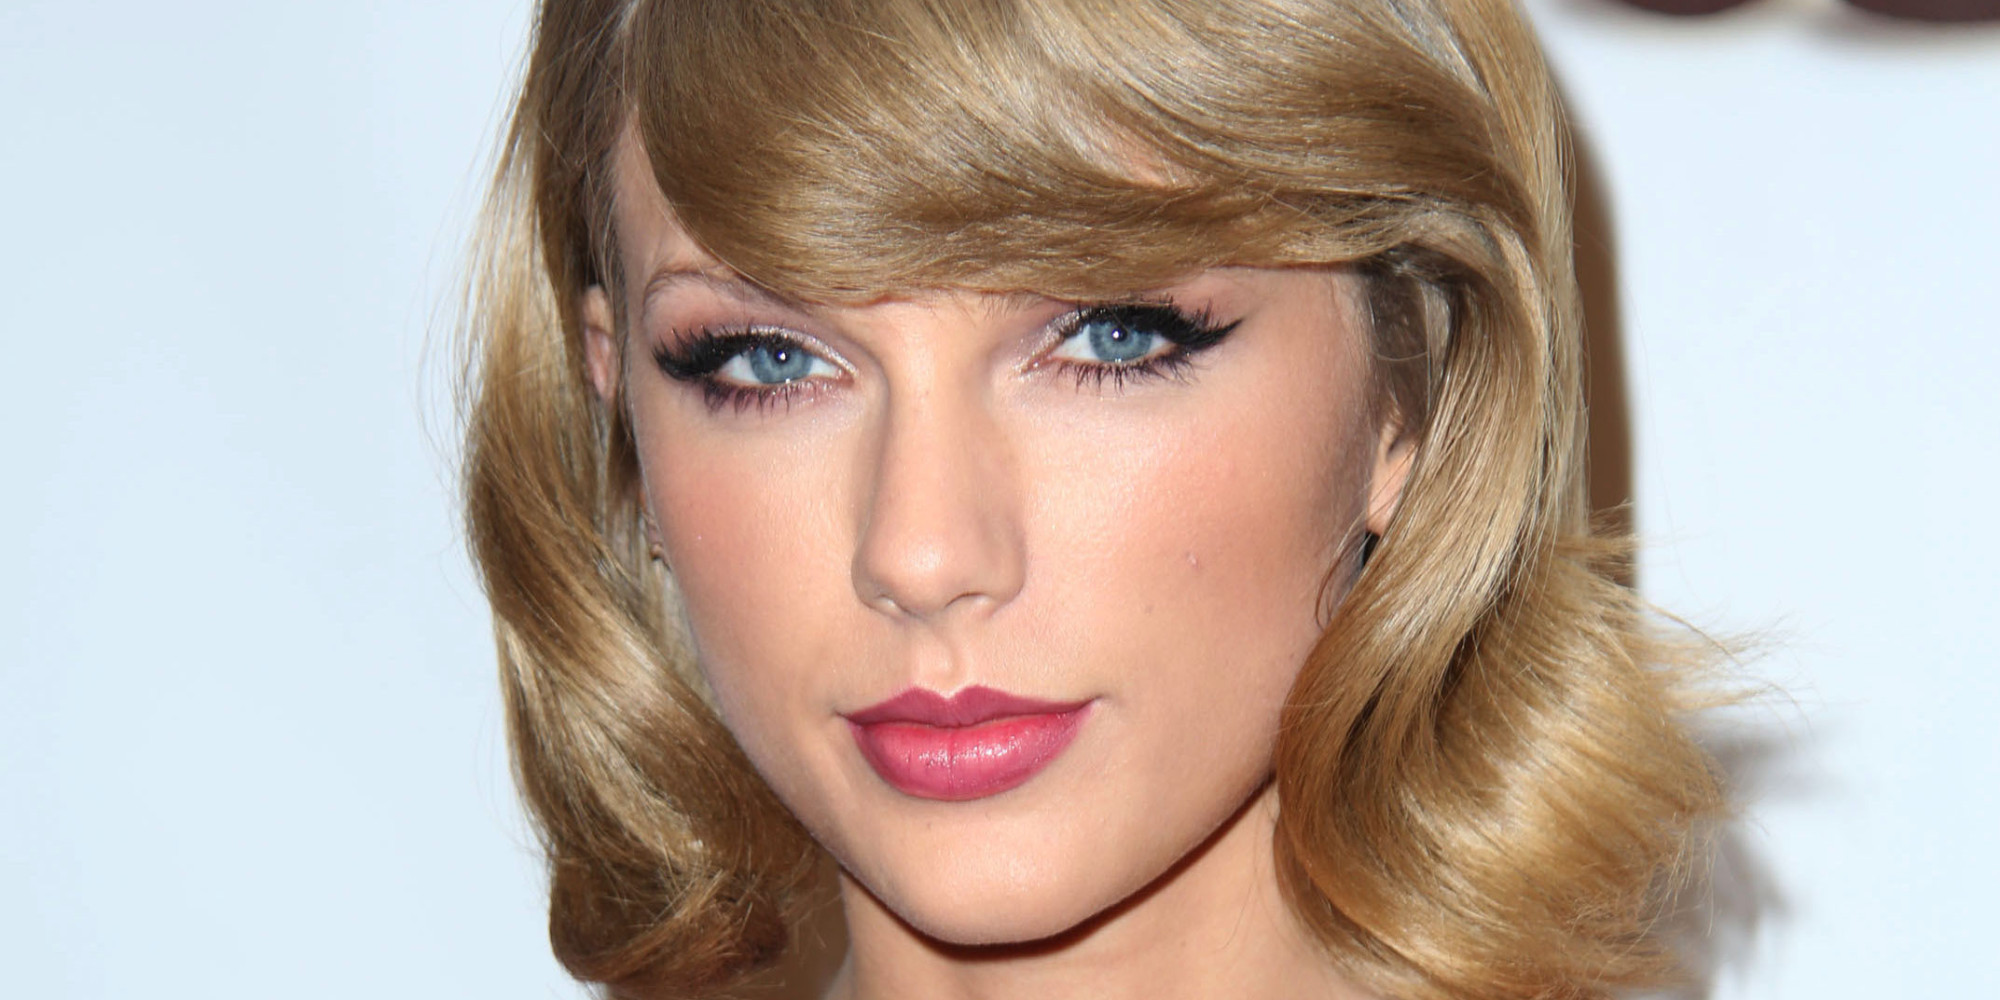 Taylor Swift Will Never, Ever, Perform At Glastonbury, According To Her ...